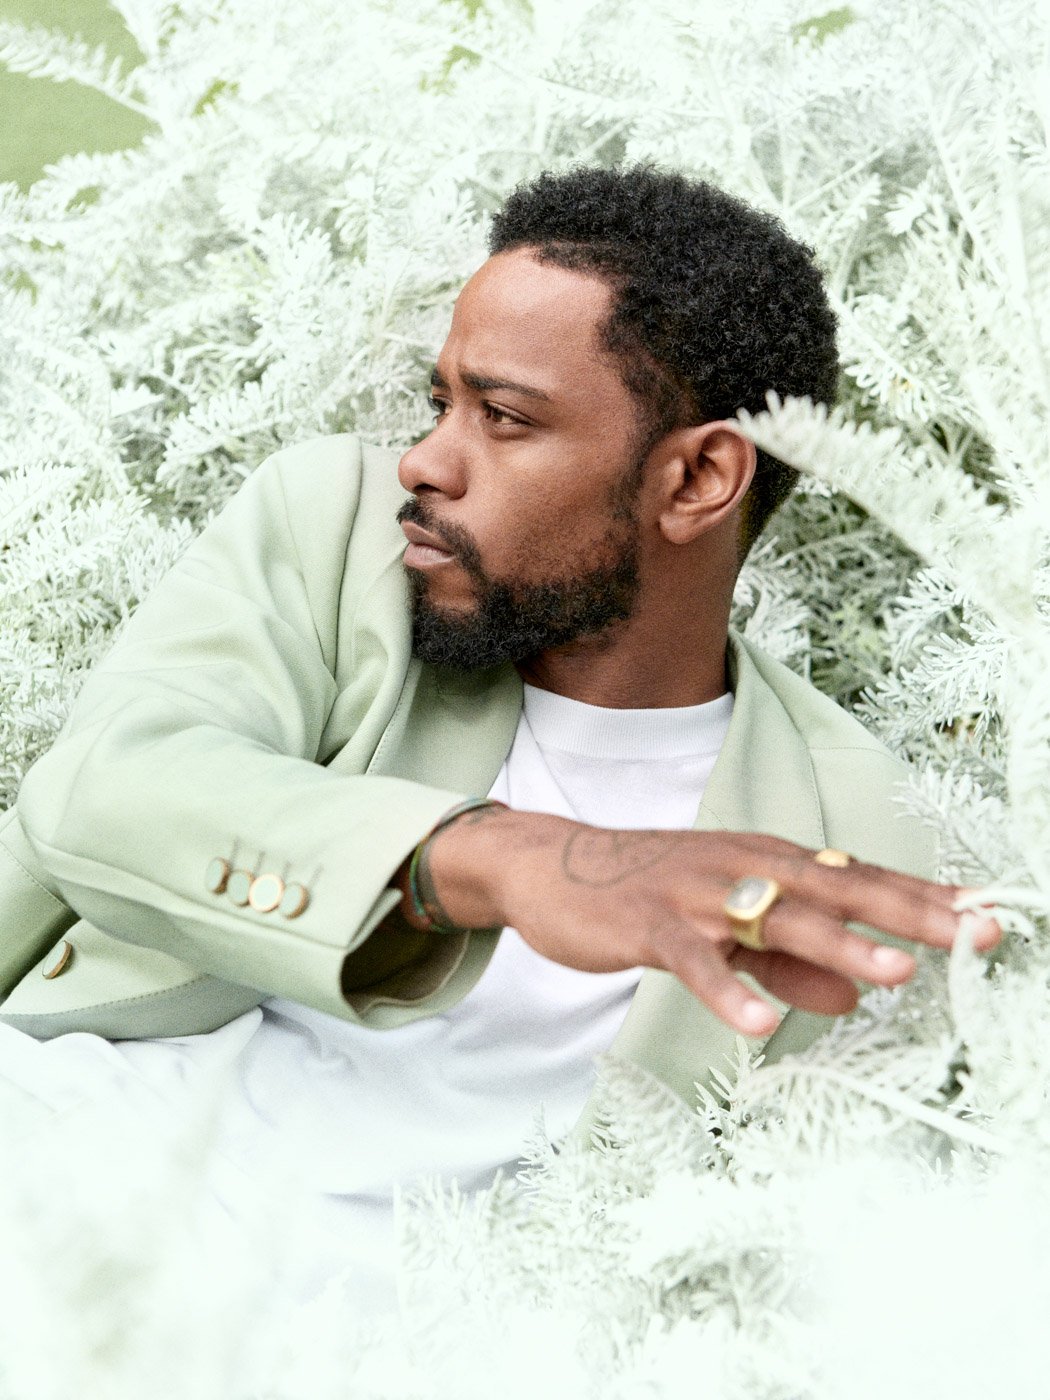  Lakeith Stanfield, Document Journal, November 9th, 2018 